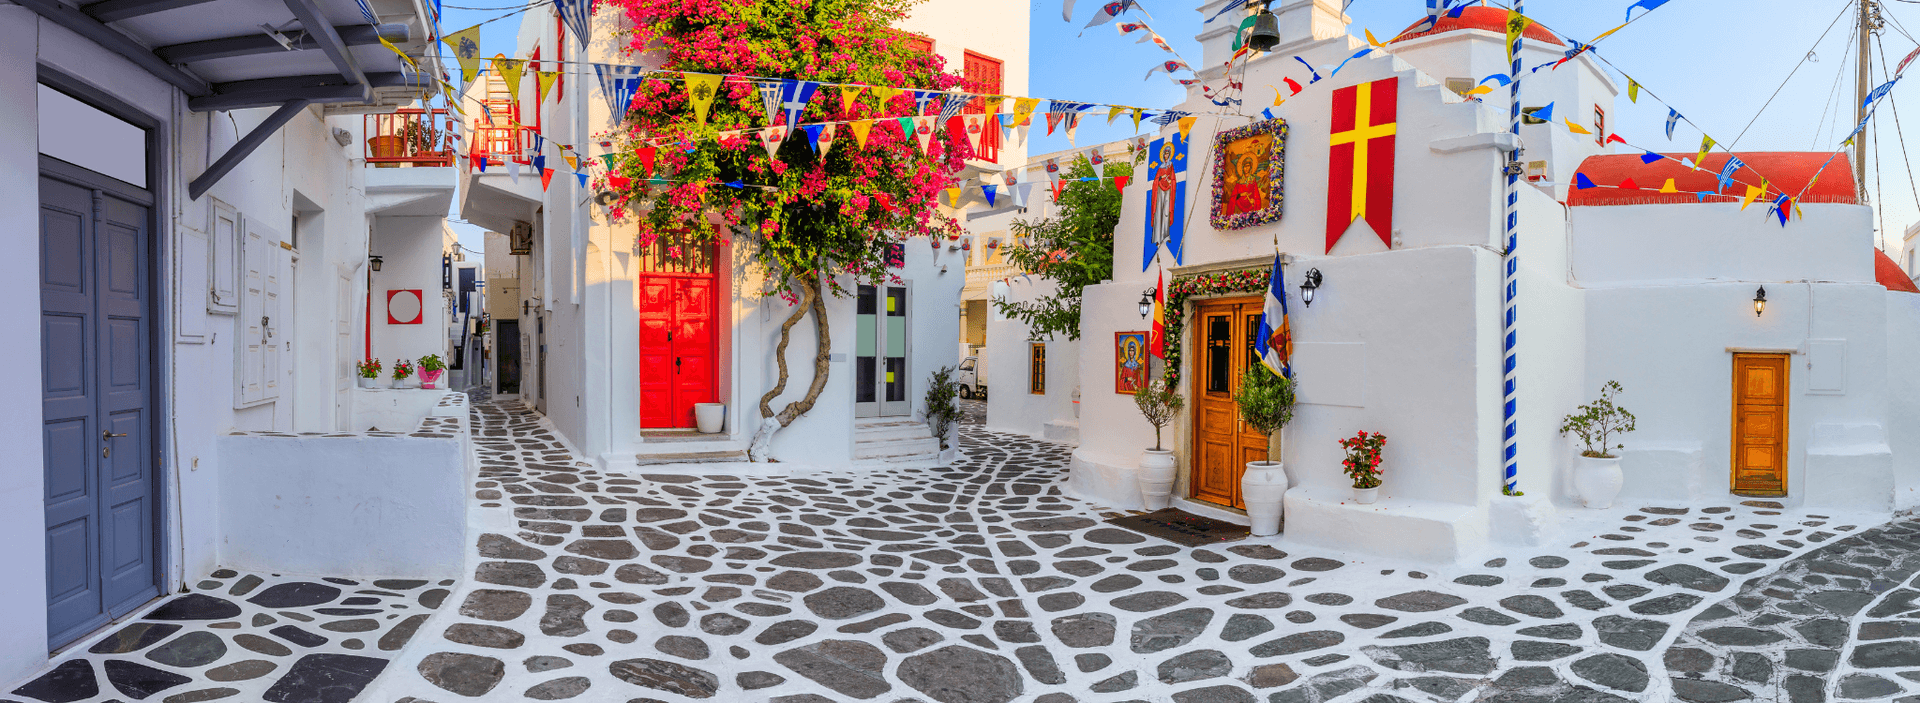 Is shopping on Mykonos really that expensive? Let's find out now!